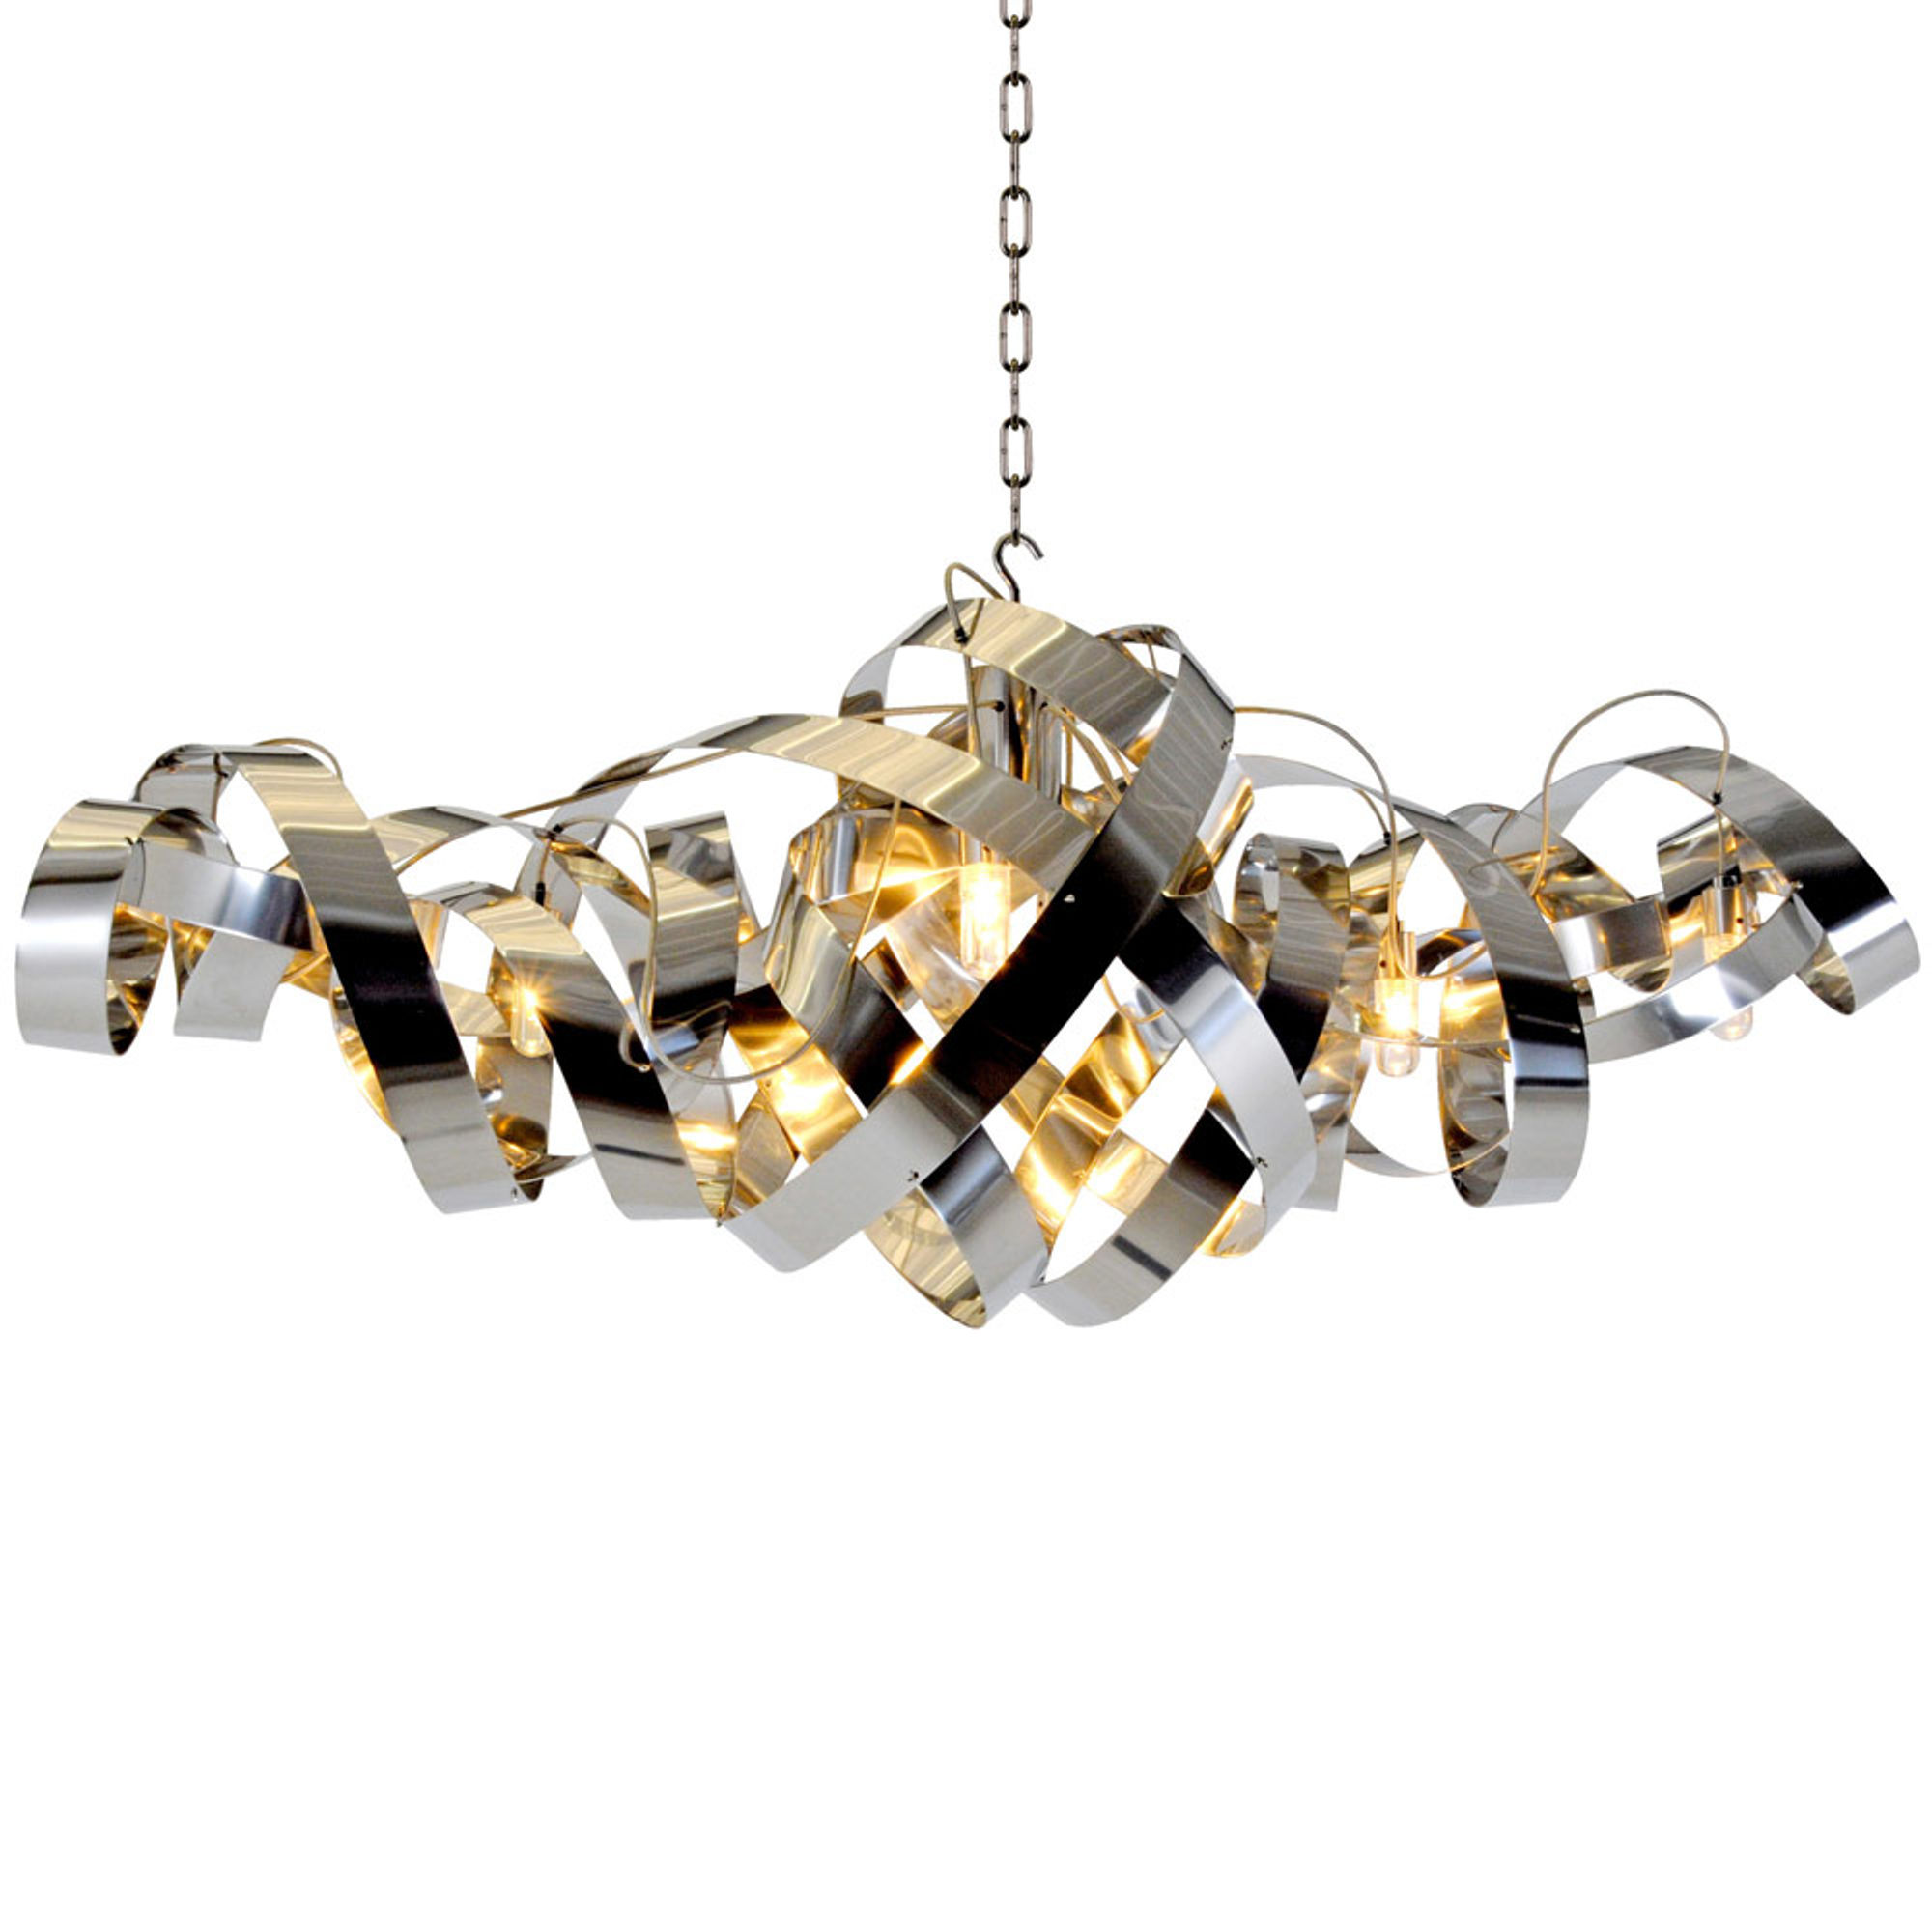 The Montone Oval Pendant by Jacco Maris 0